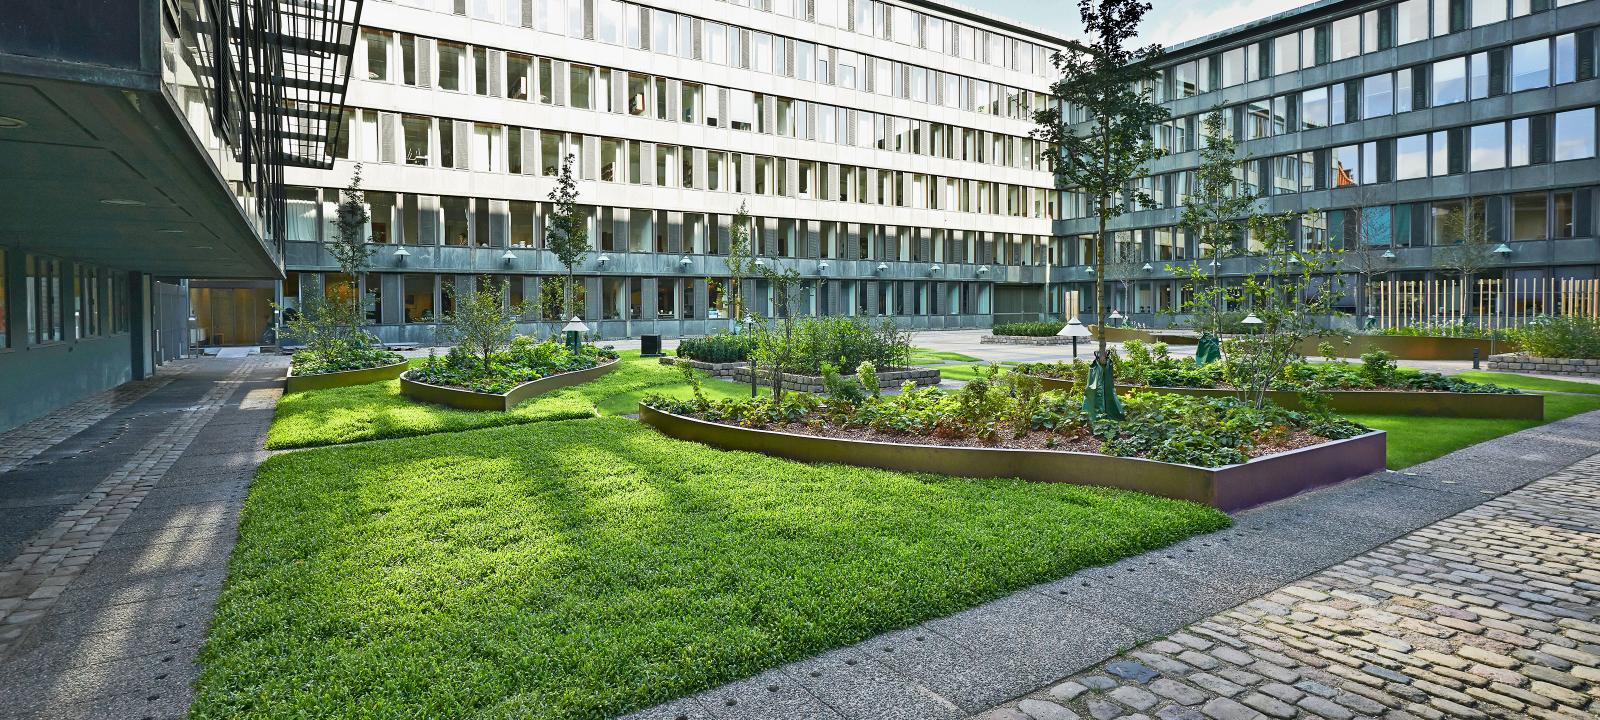 Courtyard with walking areas, lawn and plant beds with shrubs and small trees